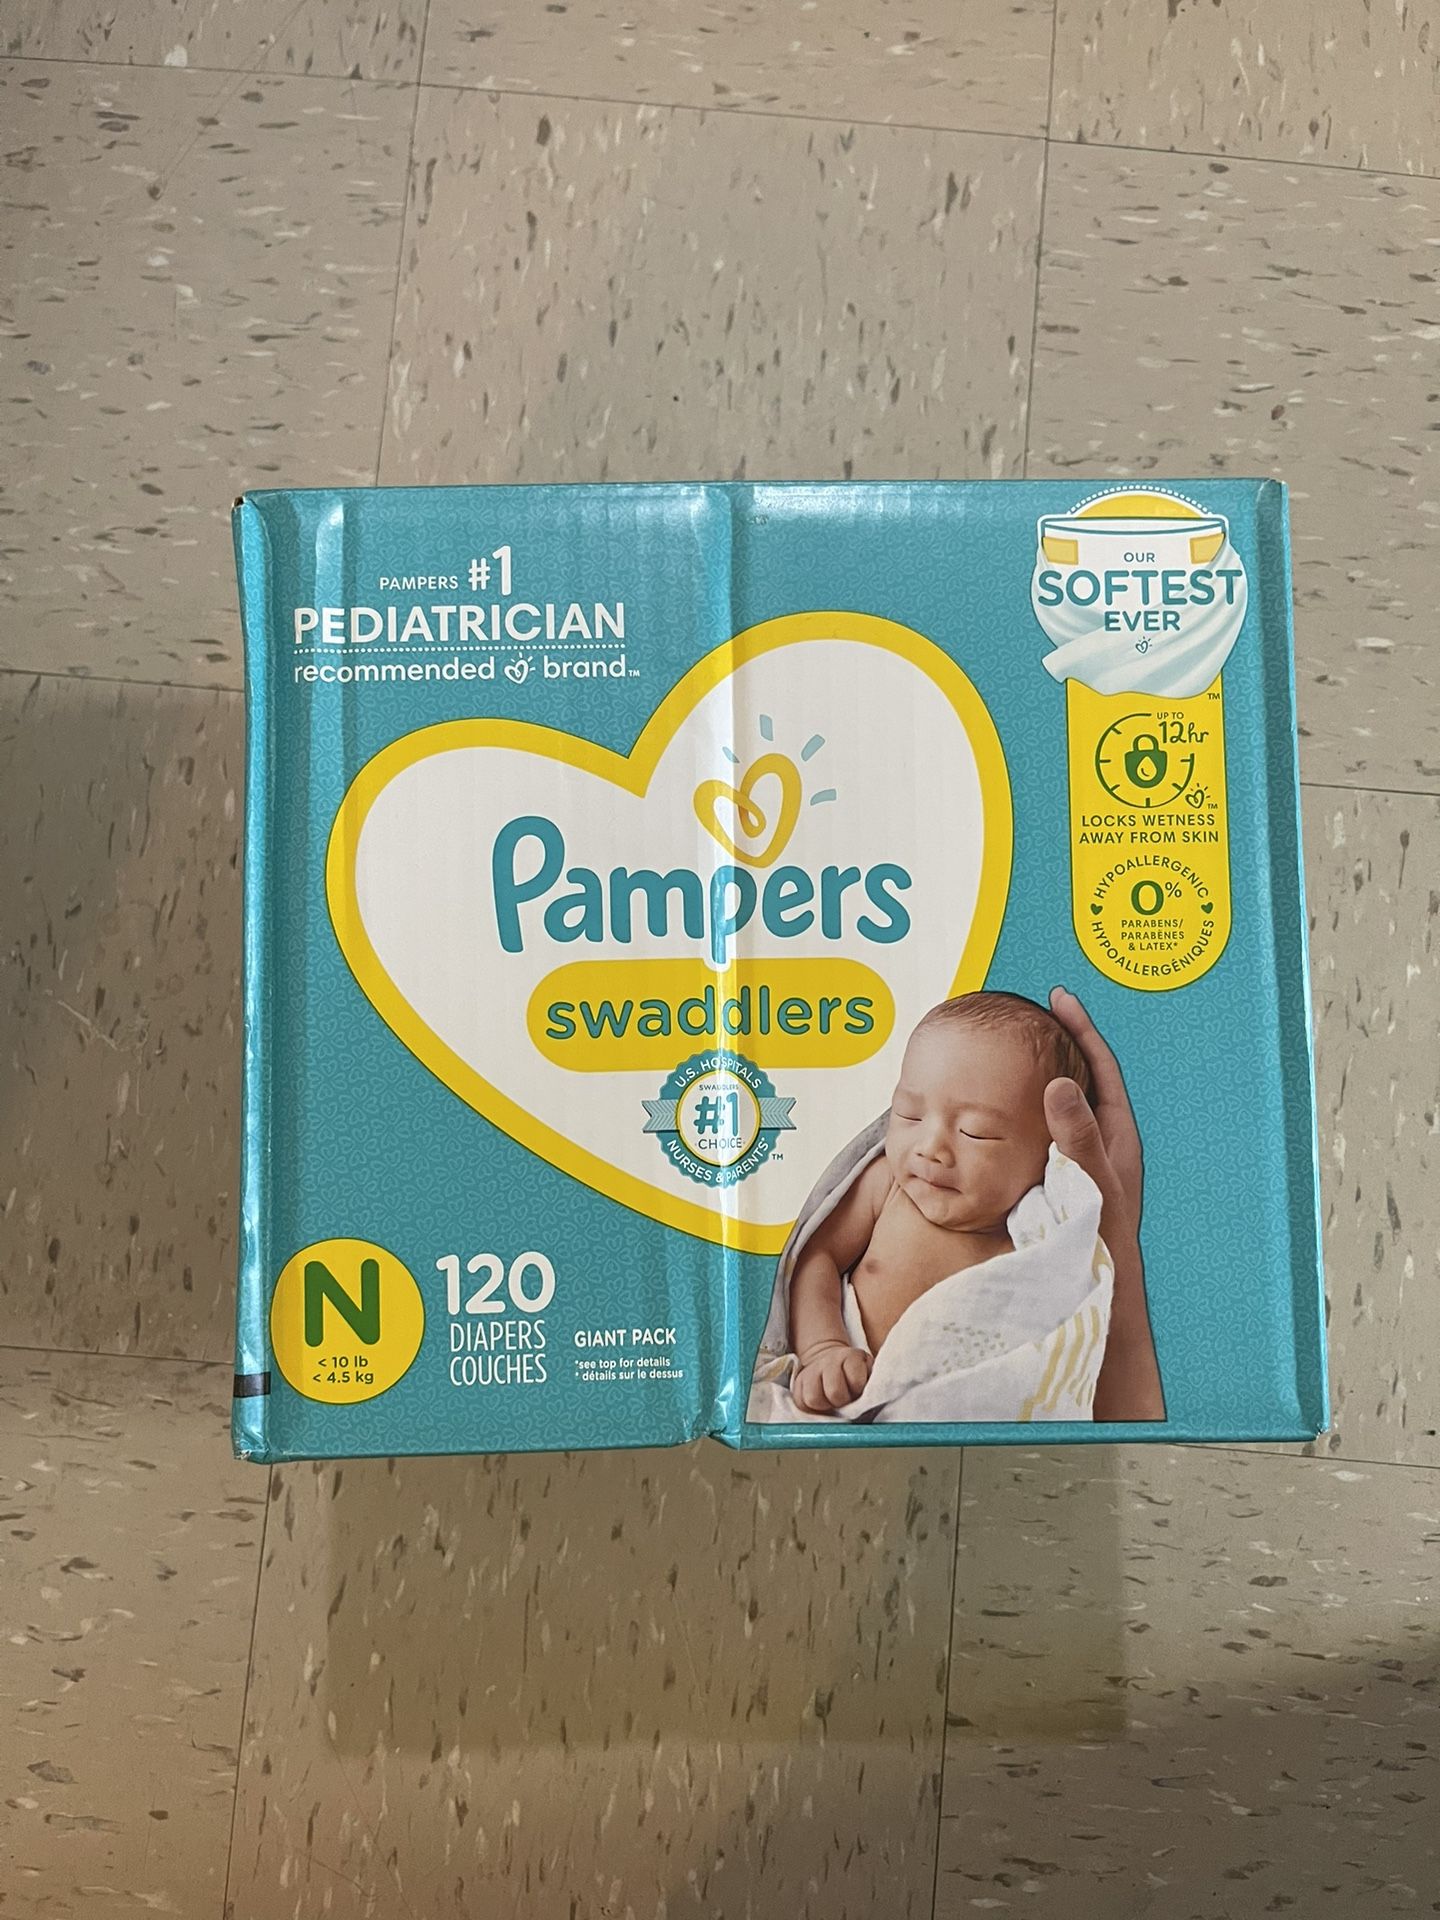 Diapers(pampers)